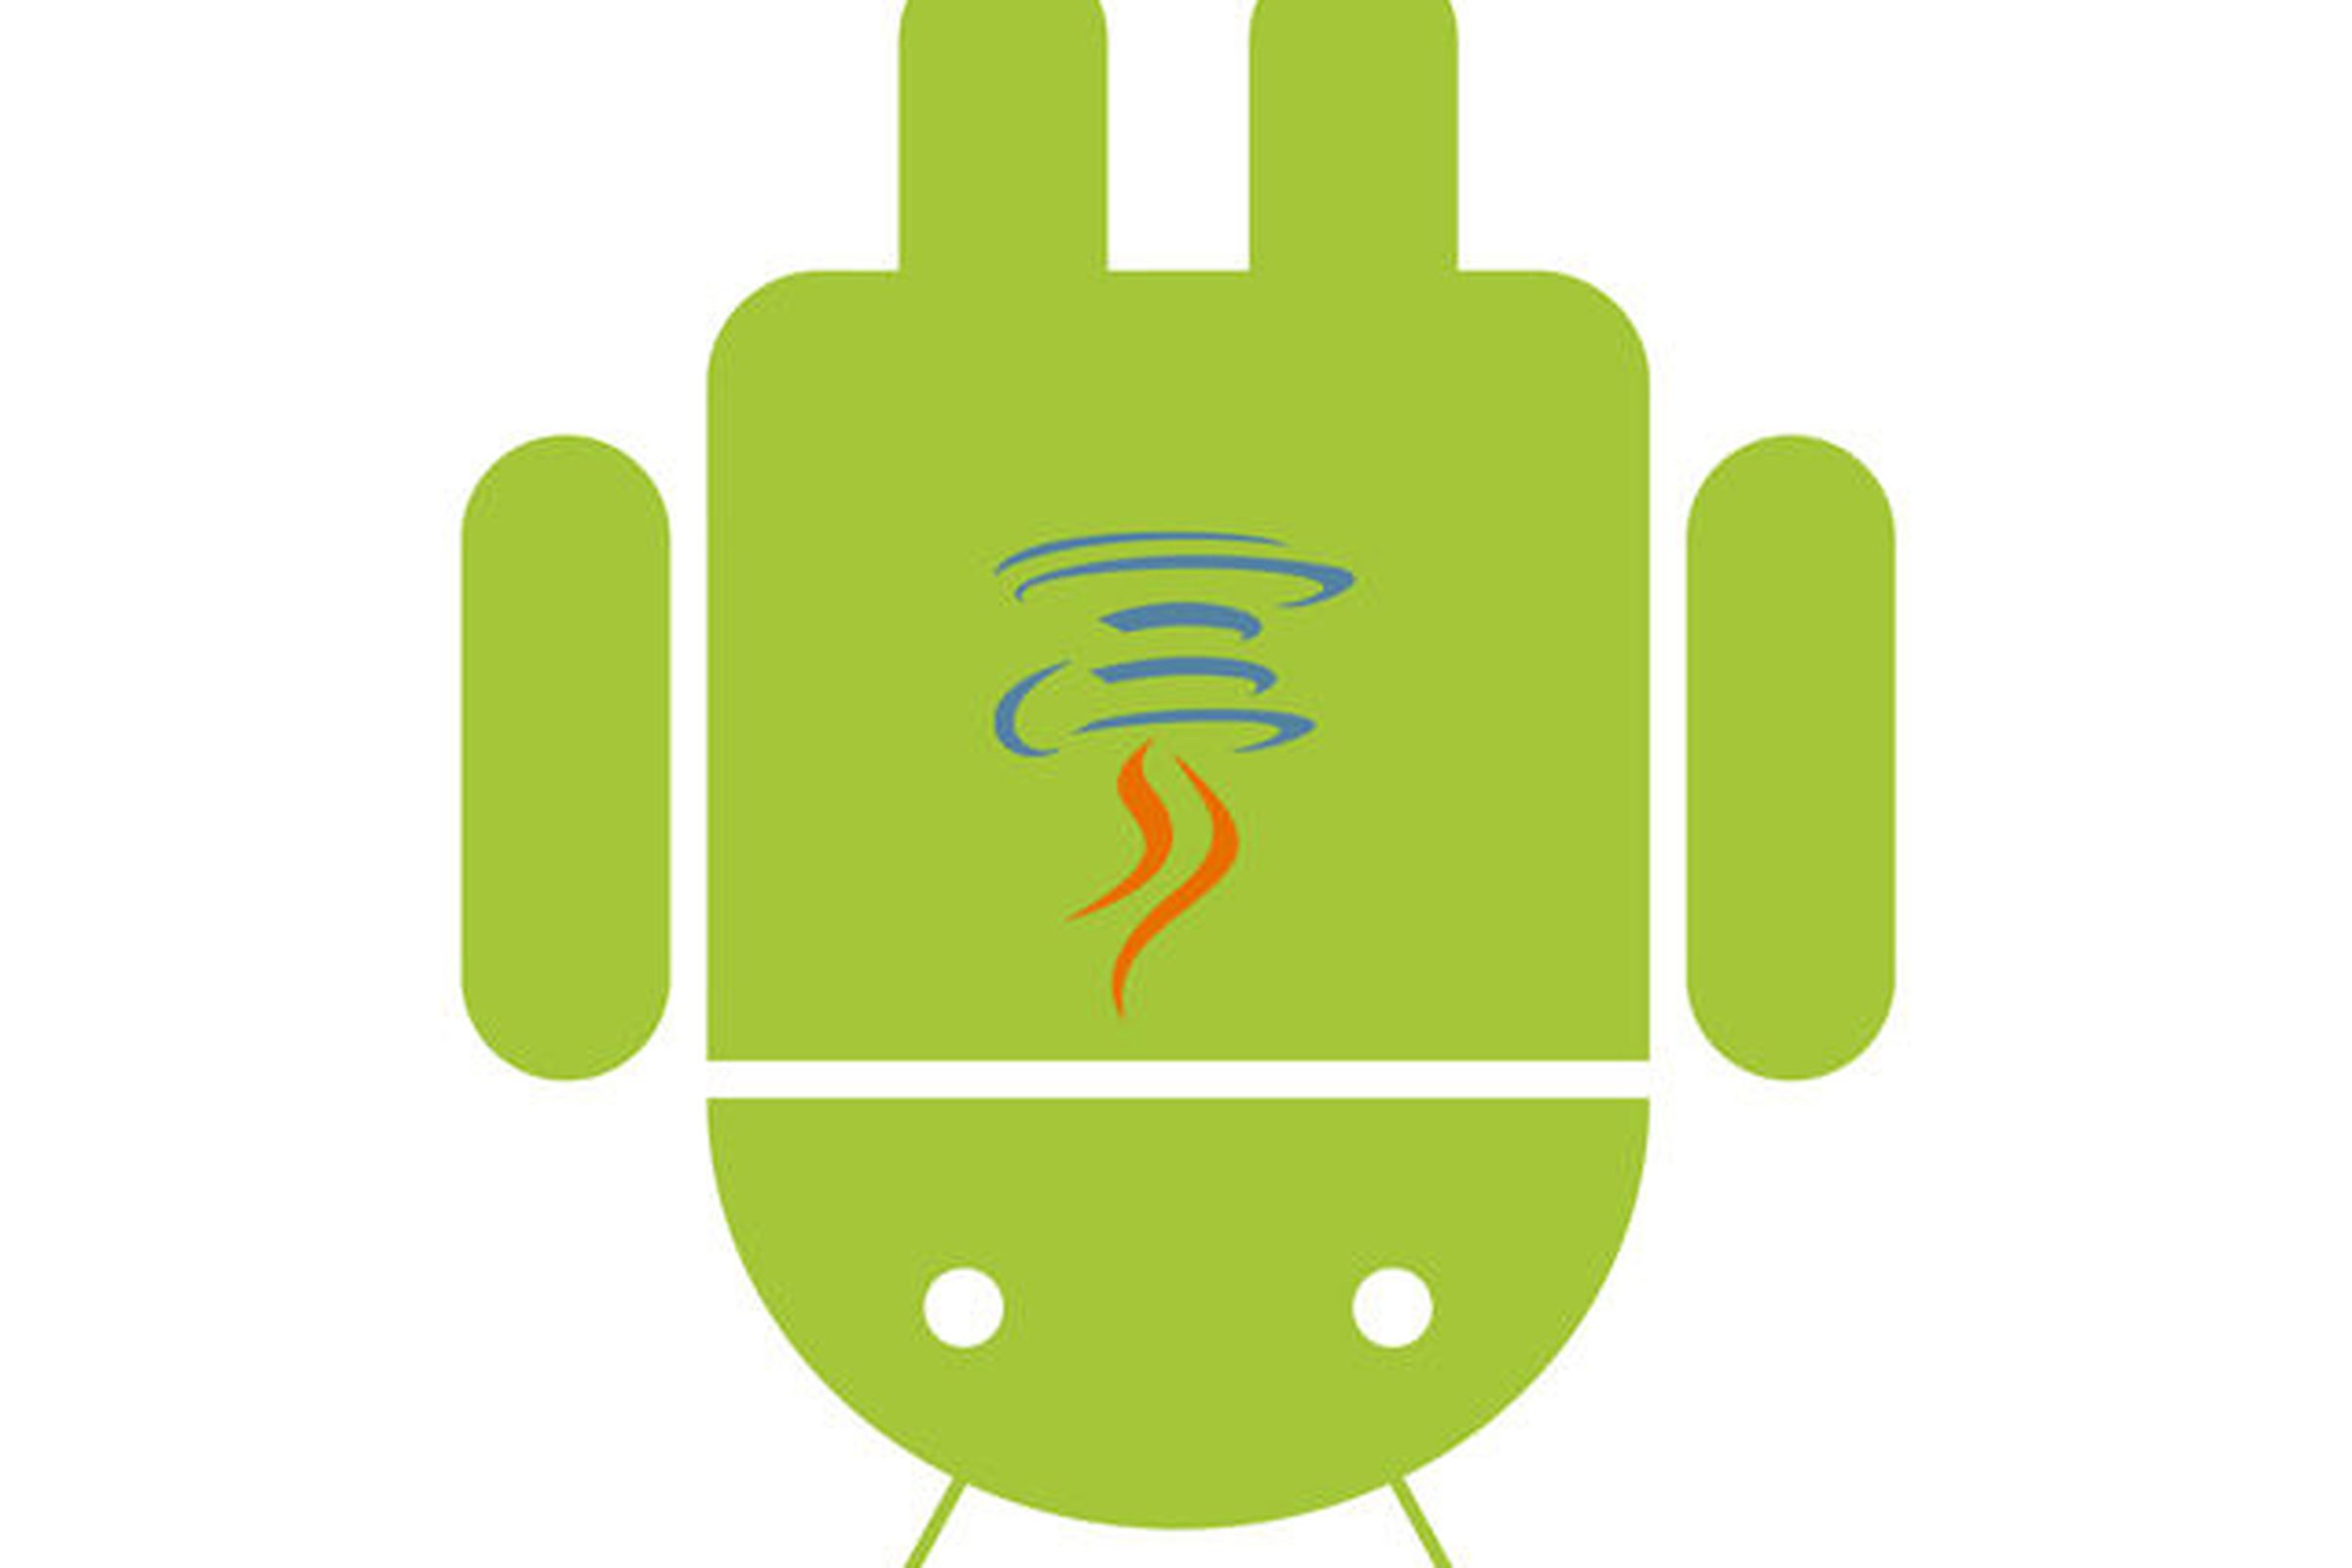 Android Java logo combination upside down